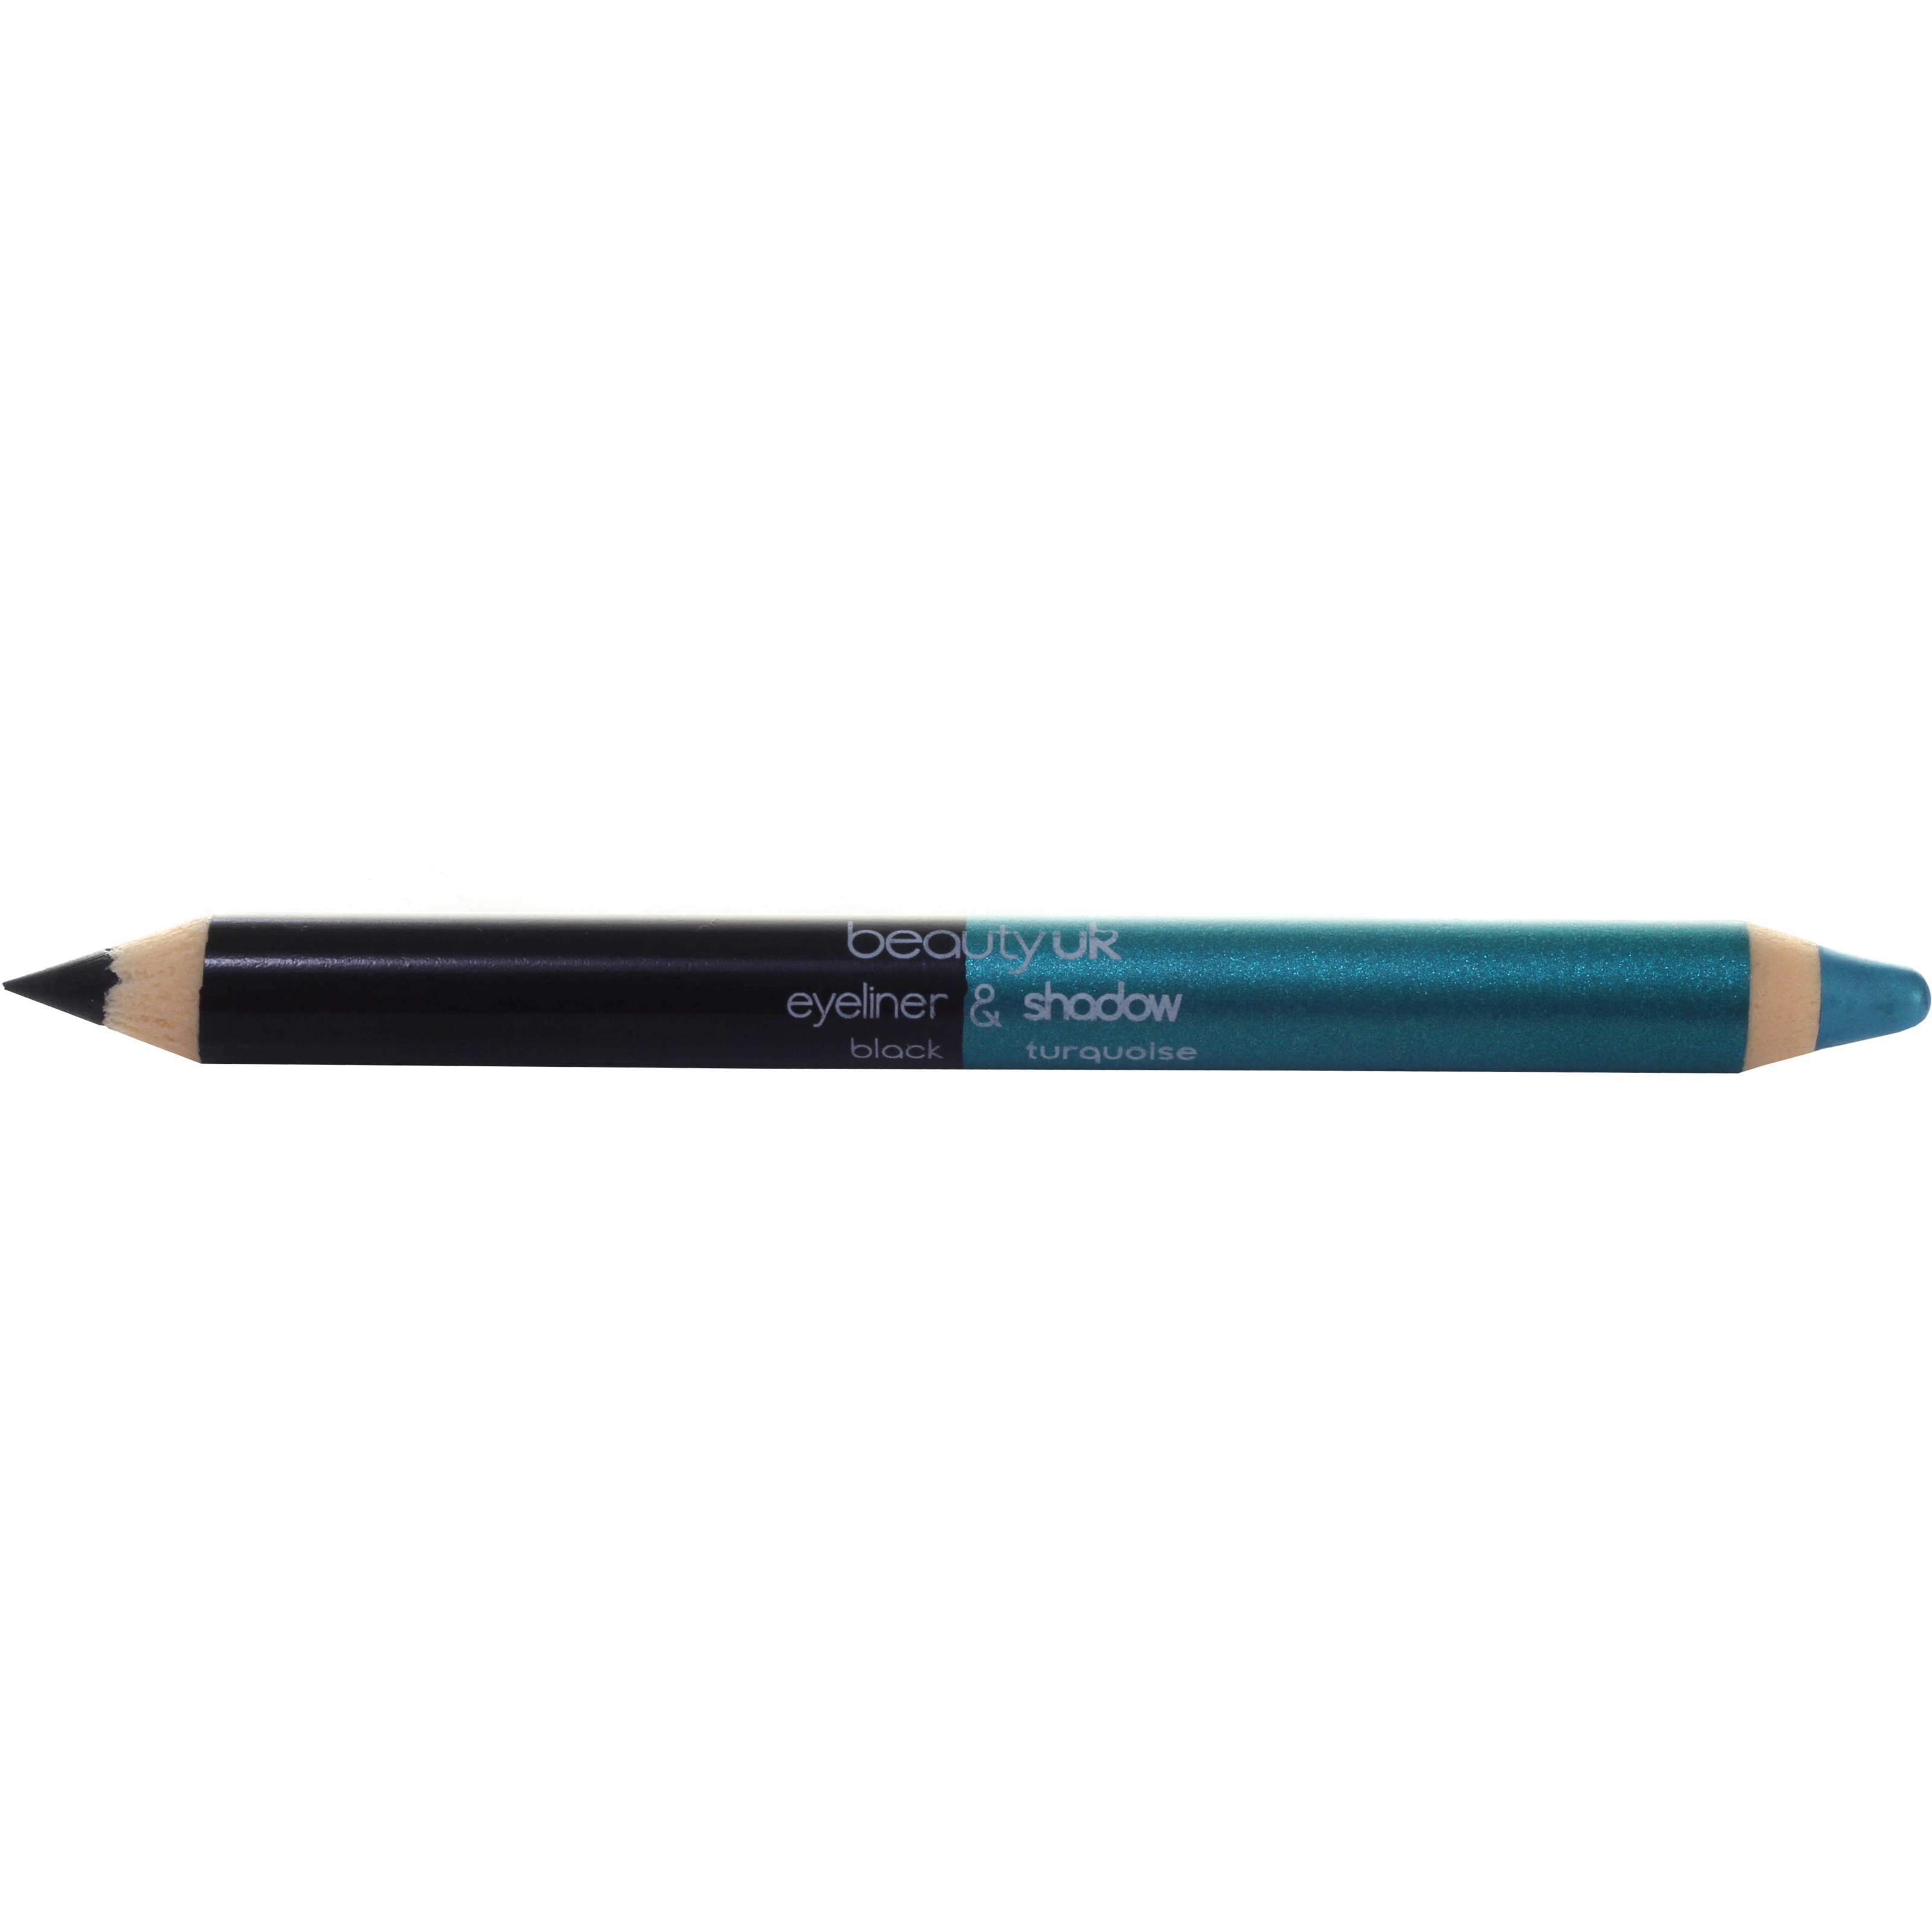 Beauty uk double ended pencil black/ turquoise